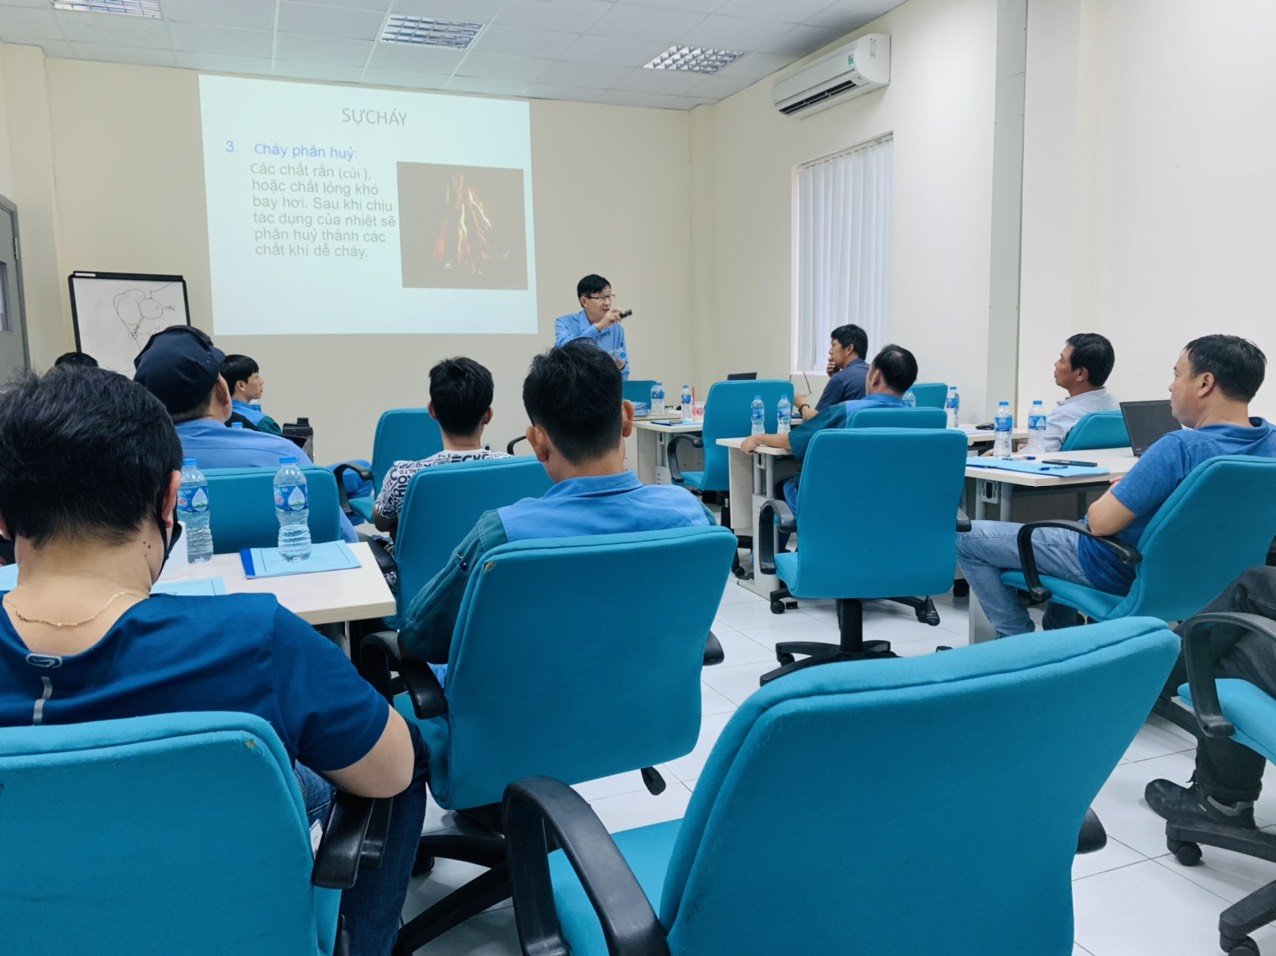 SAFETY TECHNICAL TRAINING FOR GAS TRADING ACTIVITIES AS PRESCRIBED IN DECREE NO. 87/2018/ND-CP